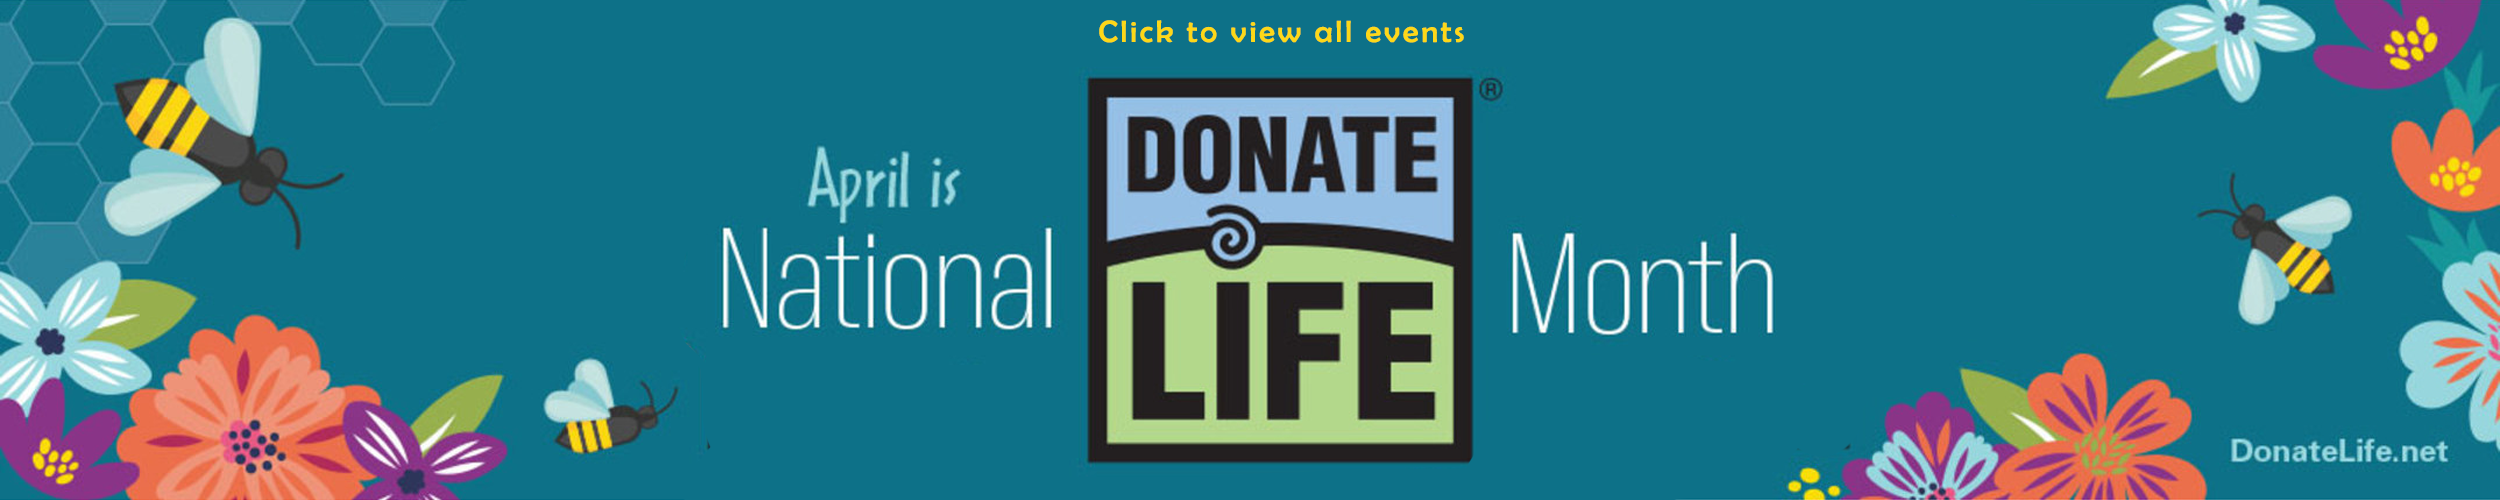 Image of National Donate Life Month